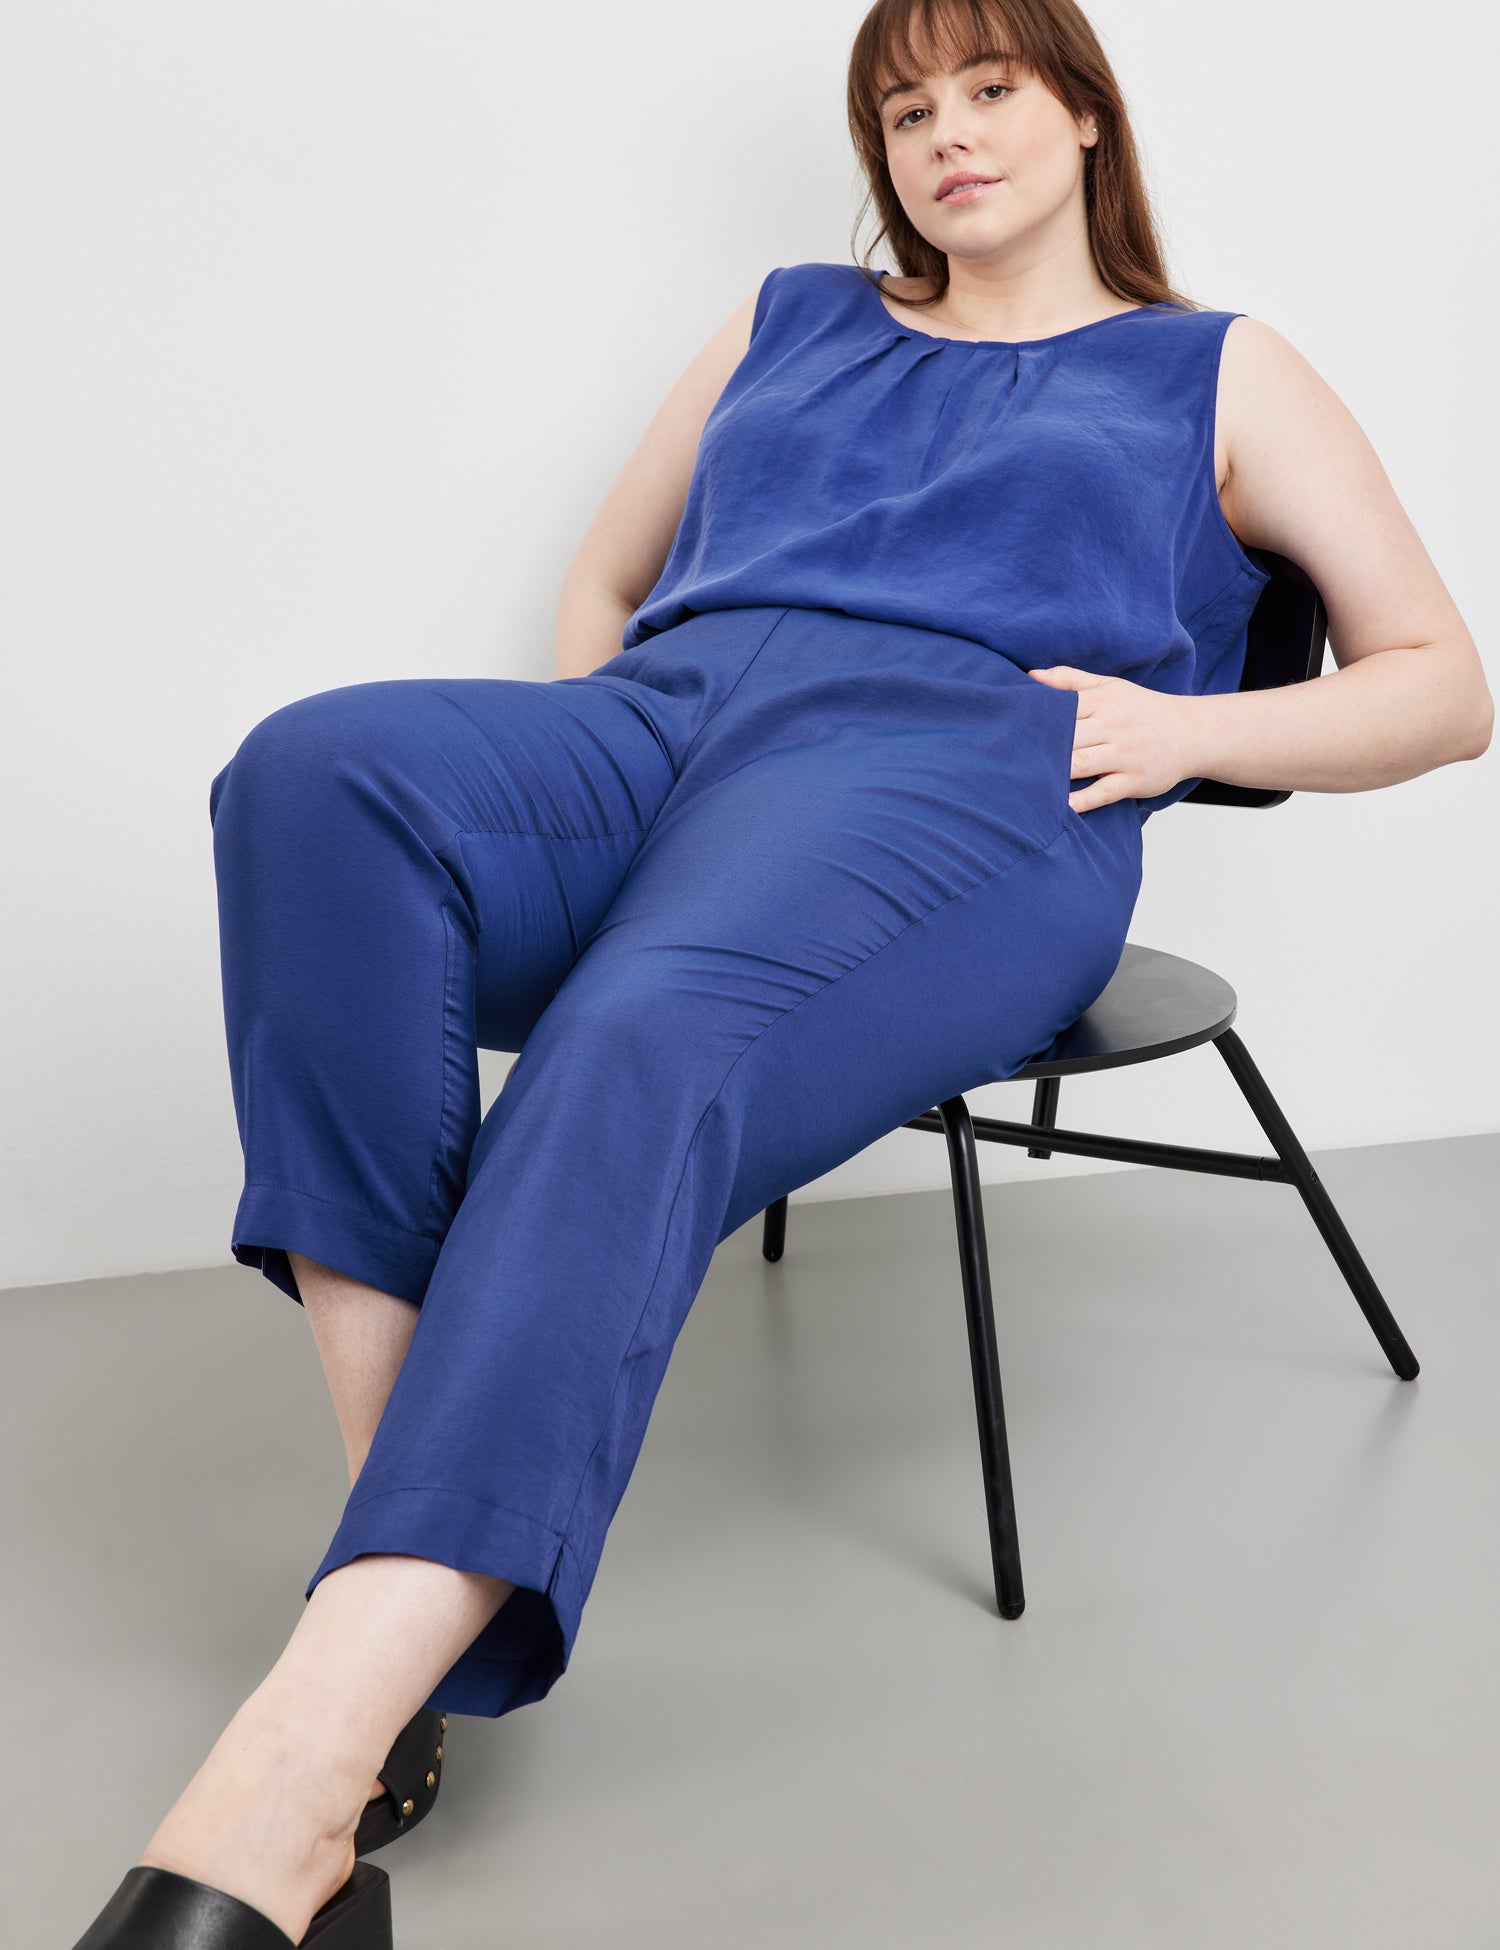 3/4-Length Trousers With A Subtle Shimmer, Mia